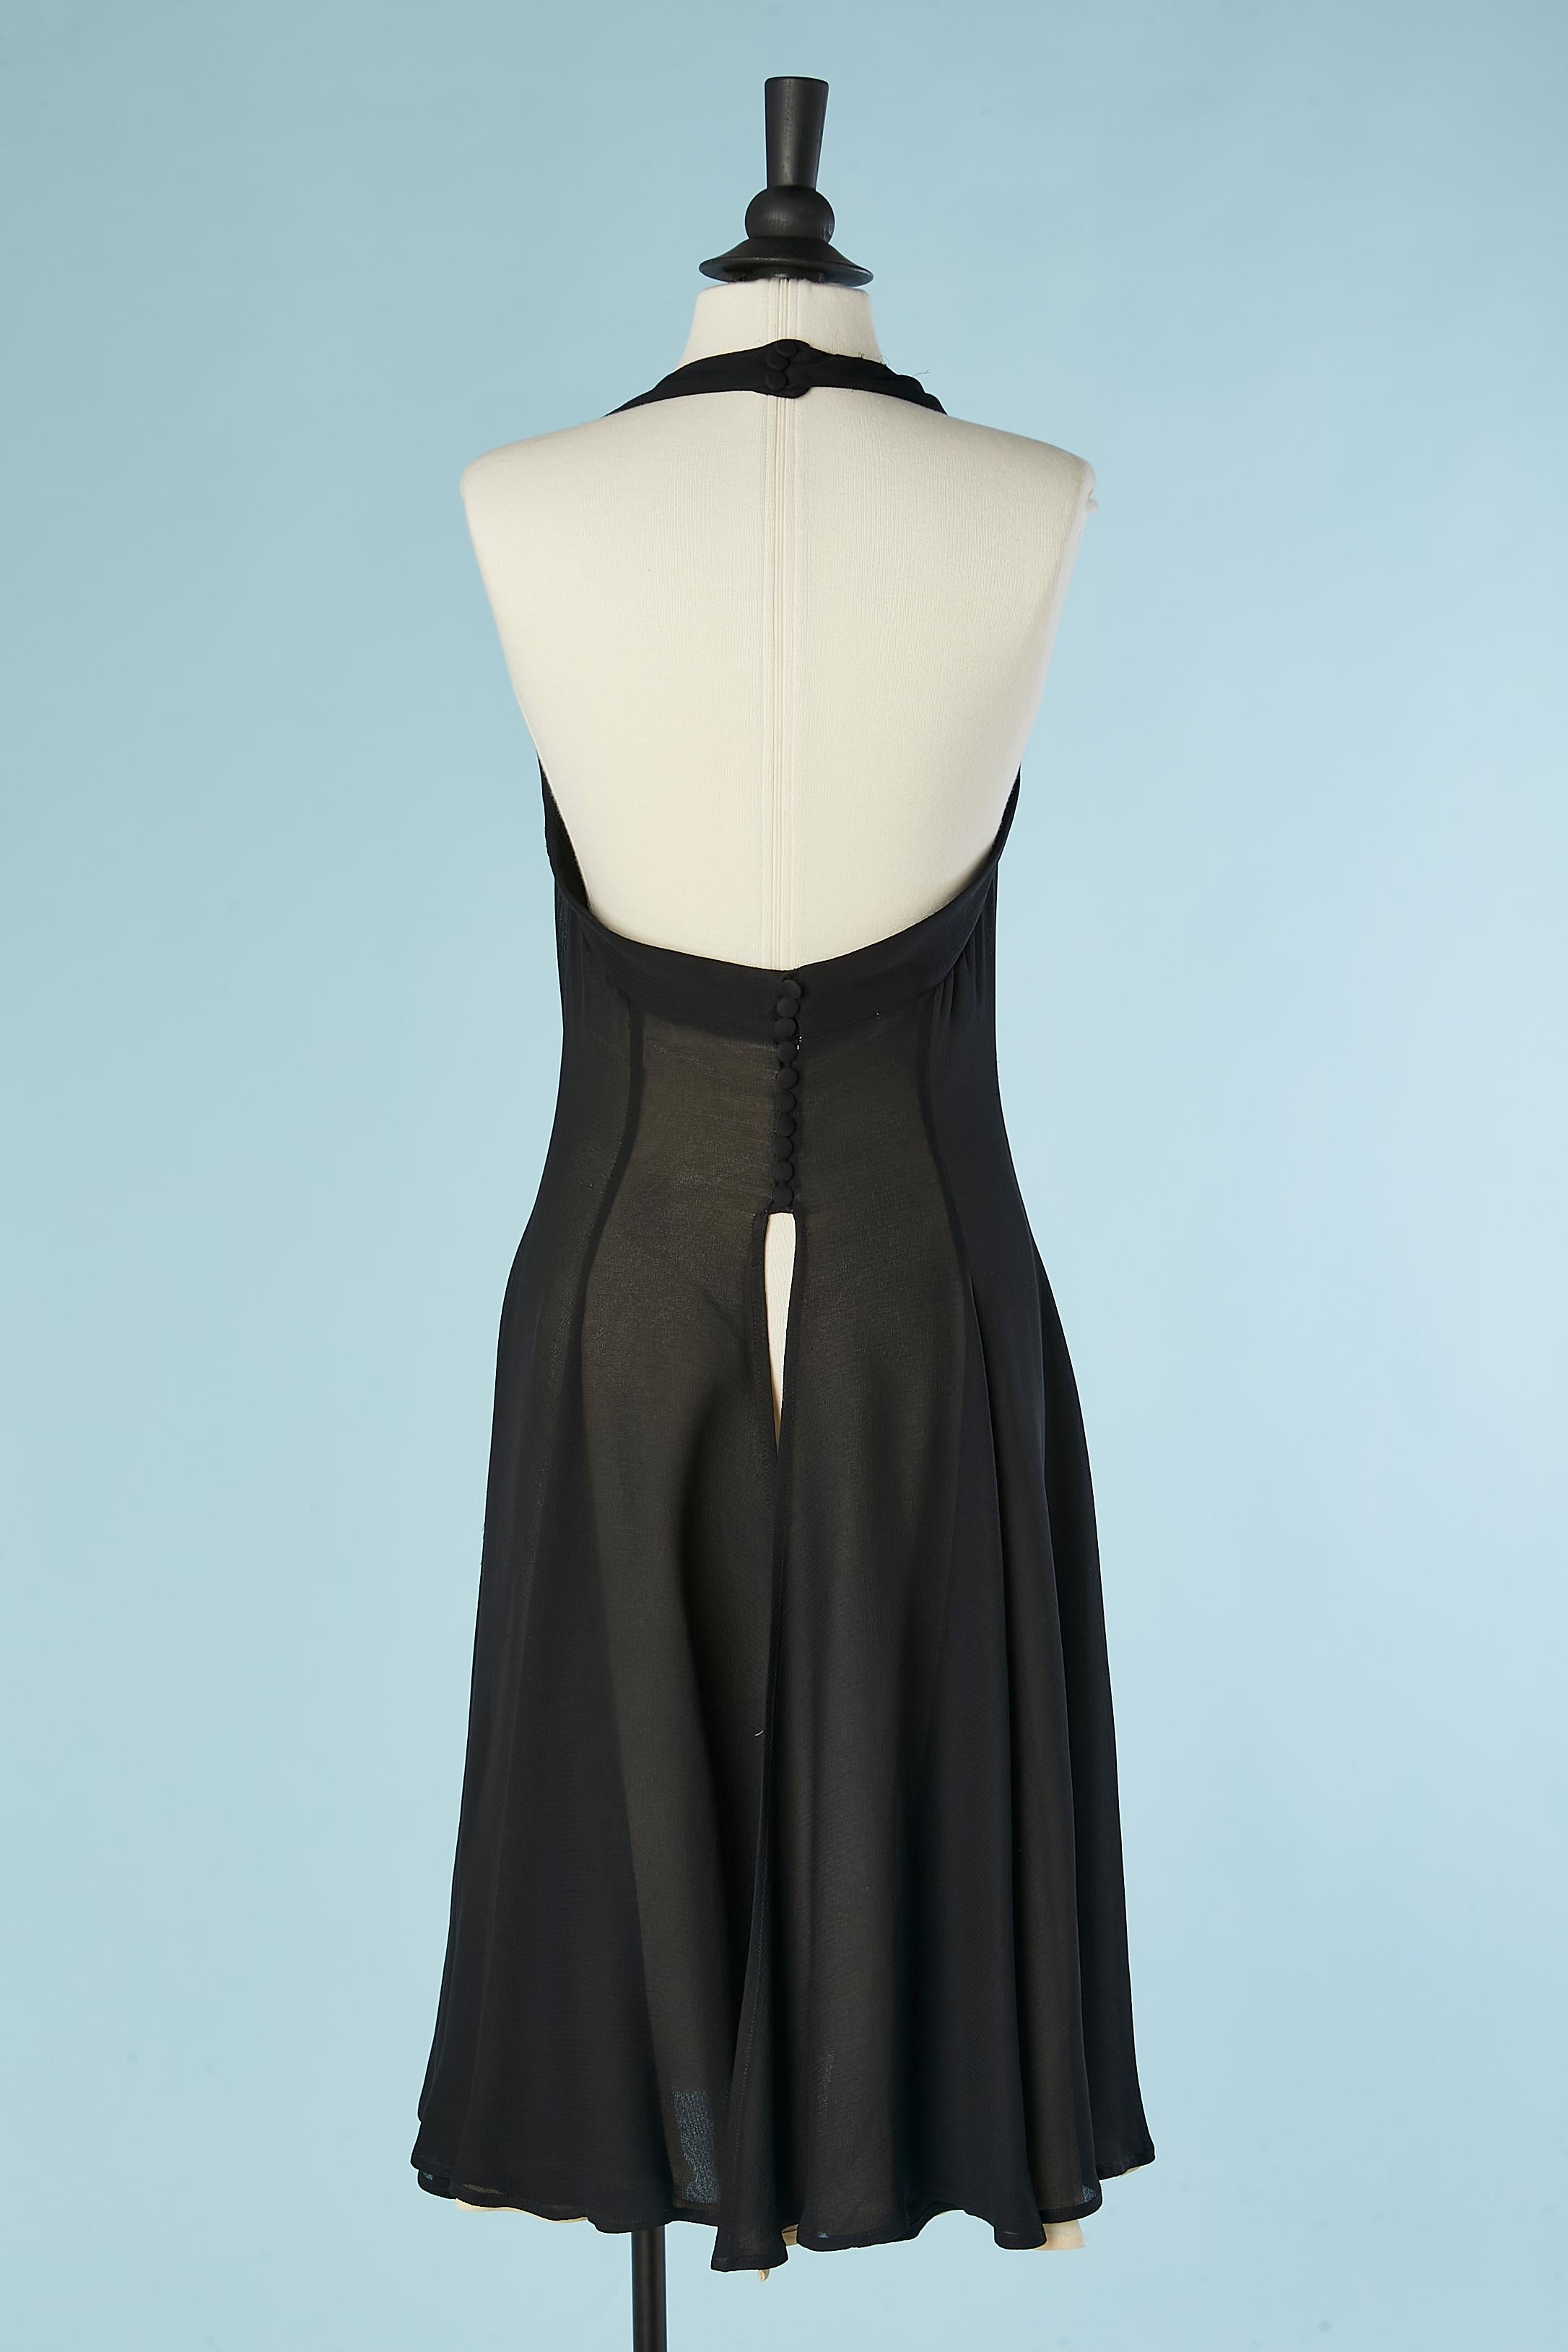 Black double lay silk chiffon backless cocktail dress open in the back ROCHAS  For Sale 1